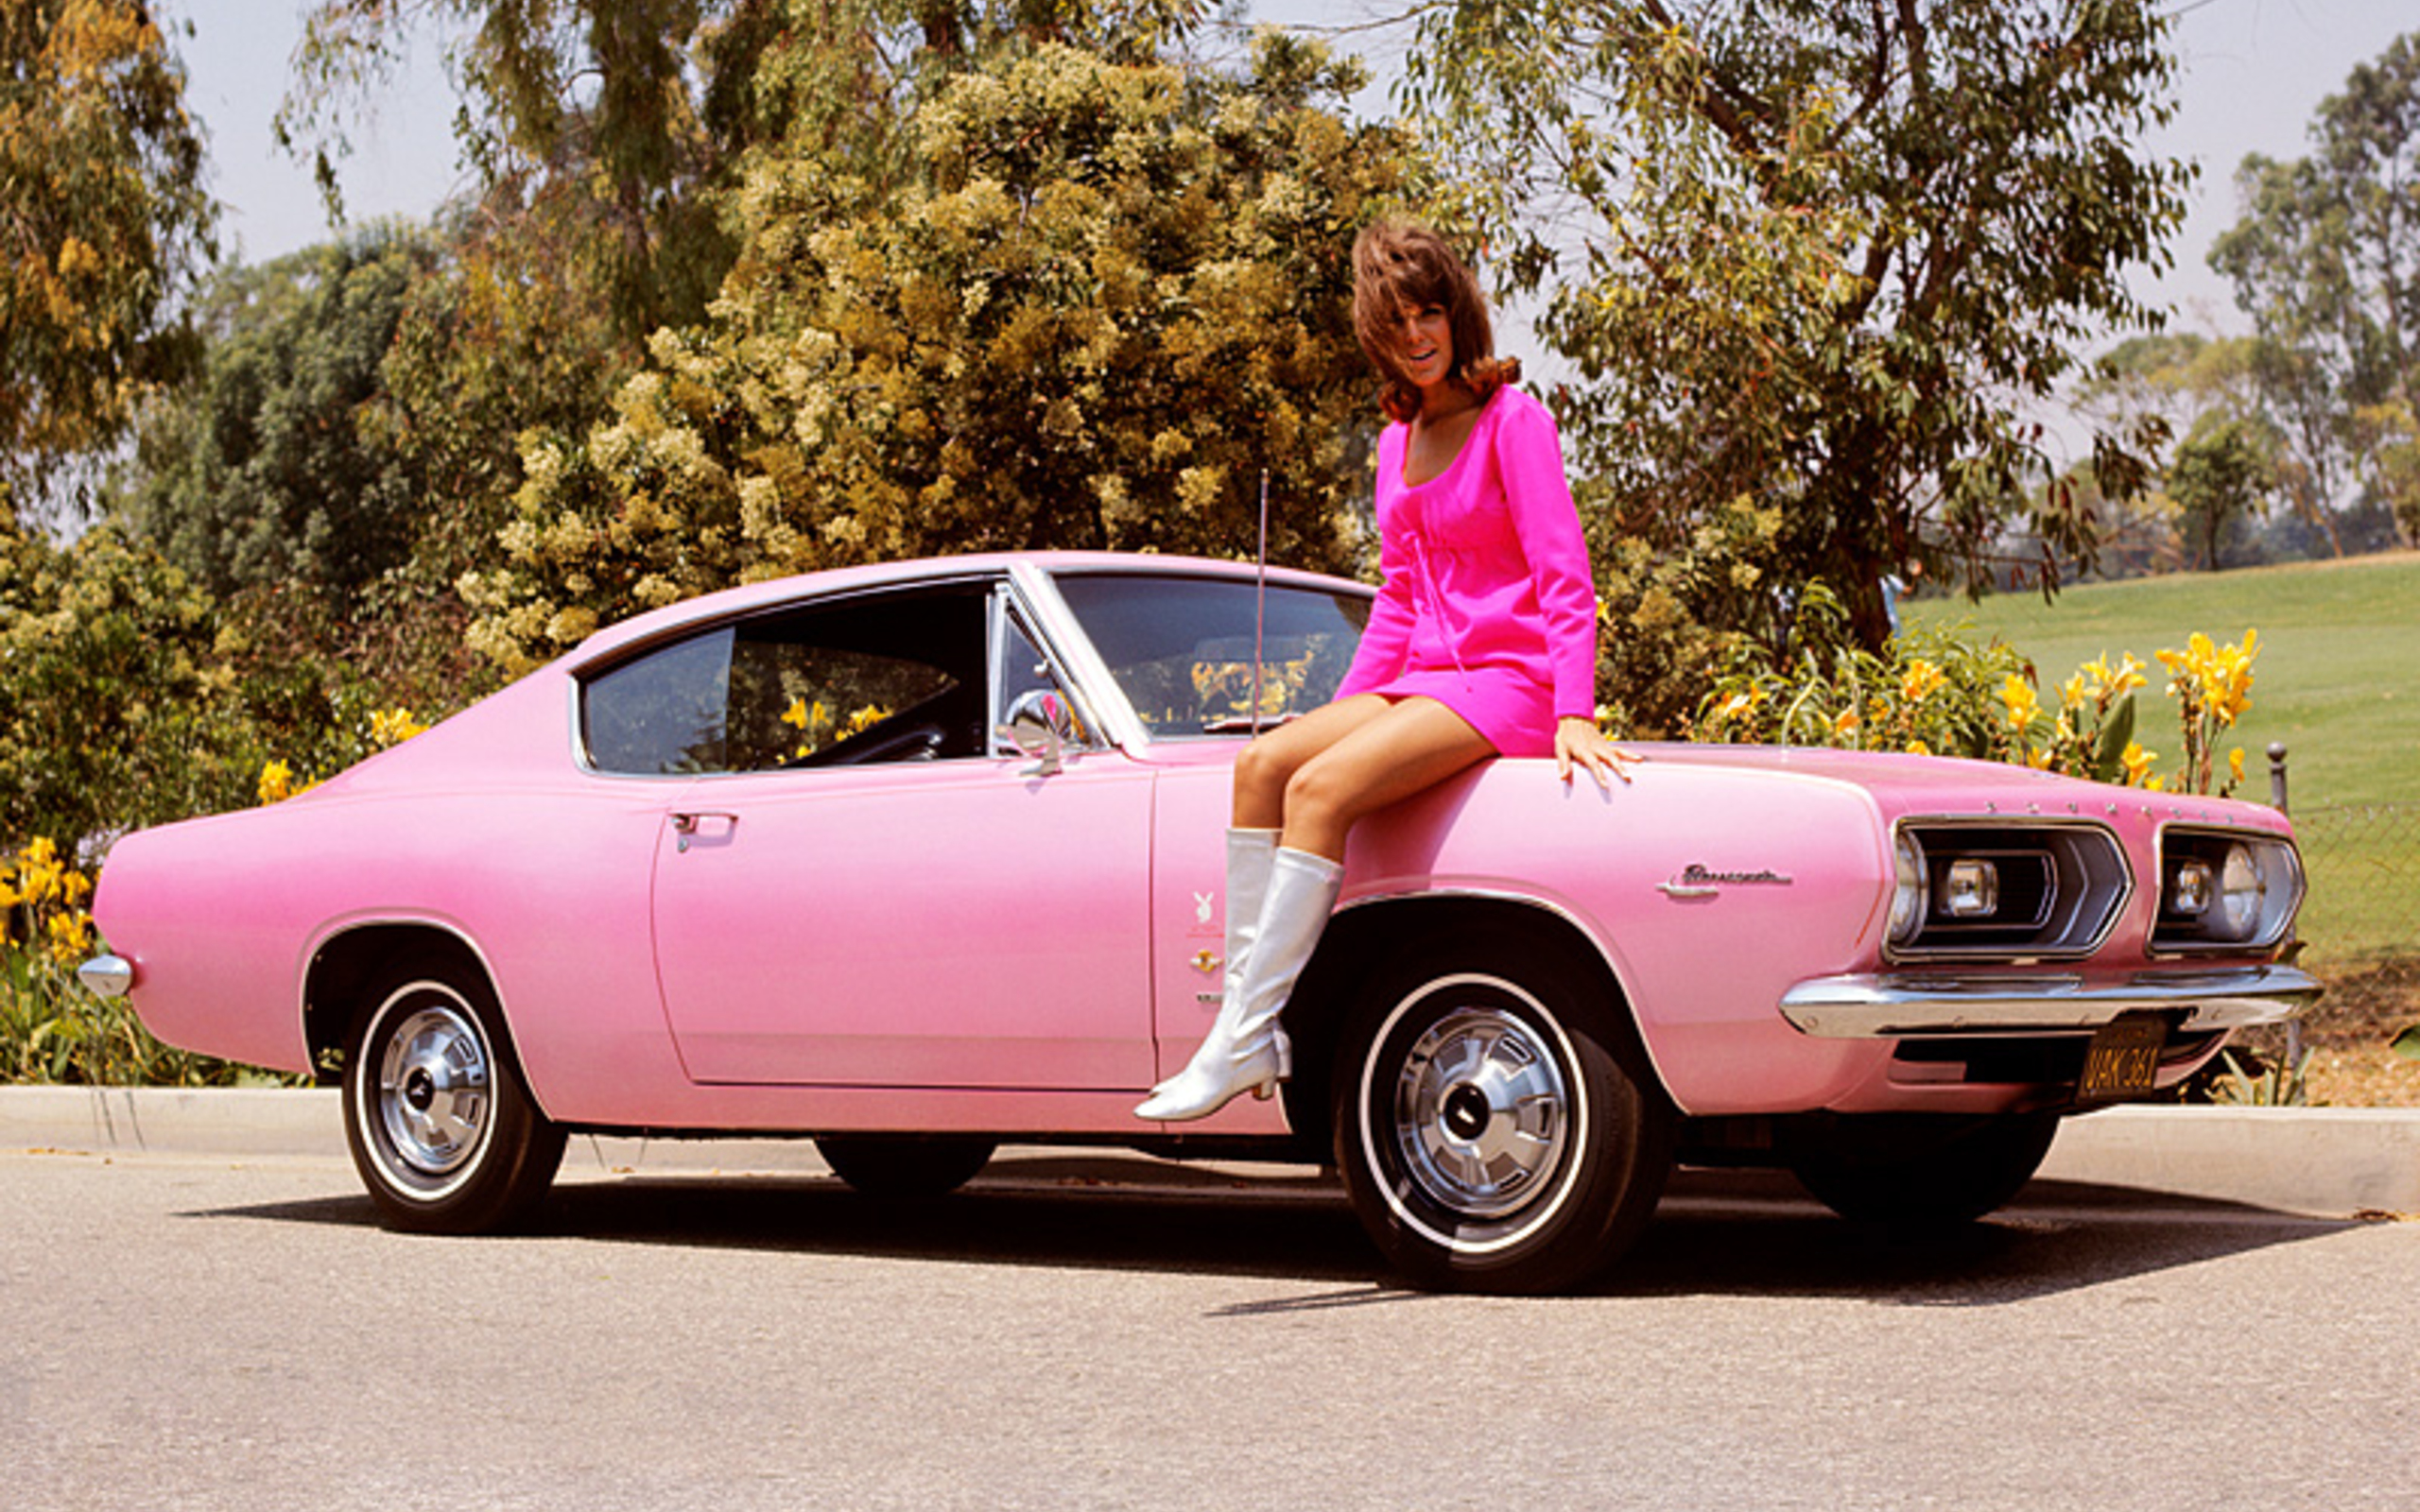 Lisa Baker with her new Plymouth Barracuda - 1967.jpg